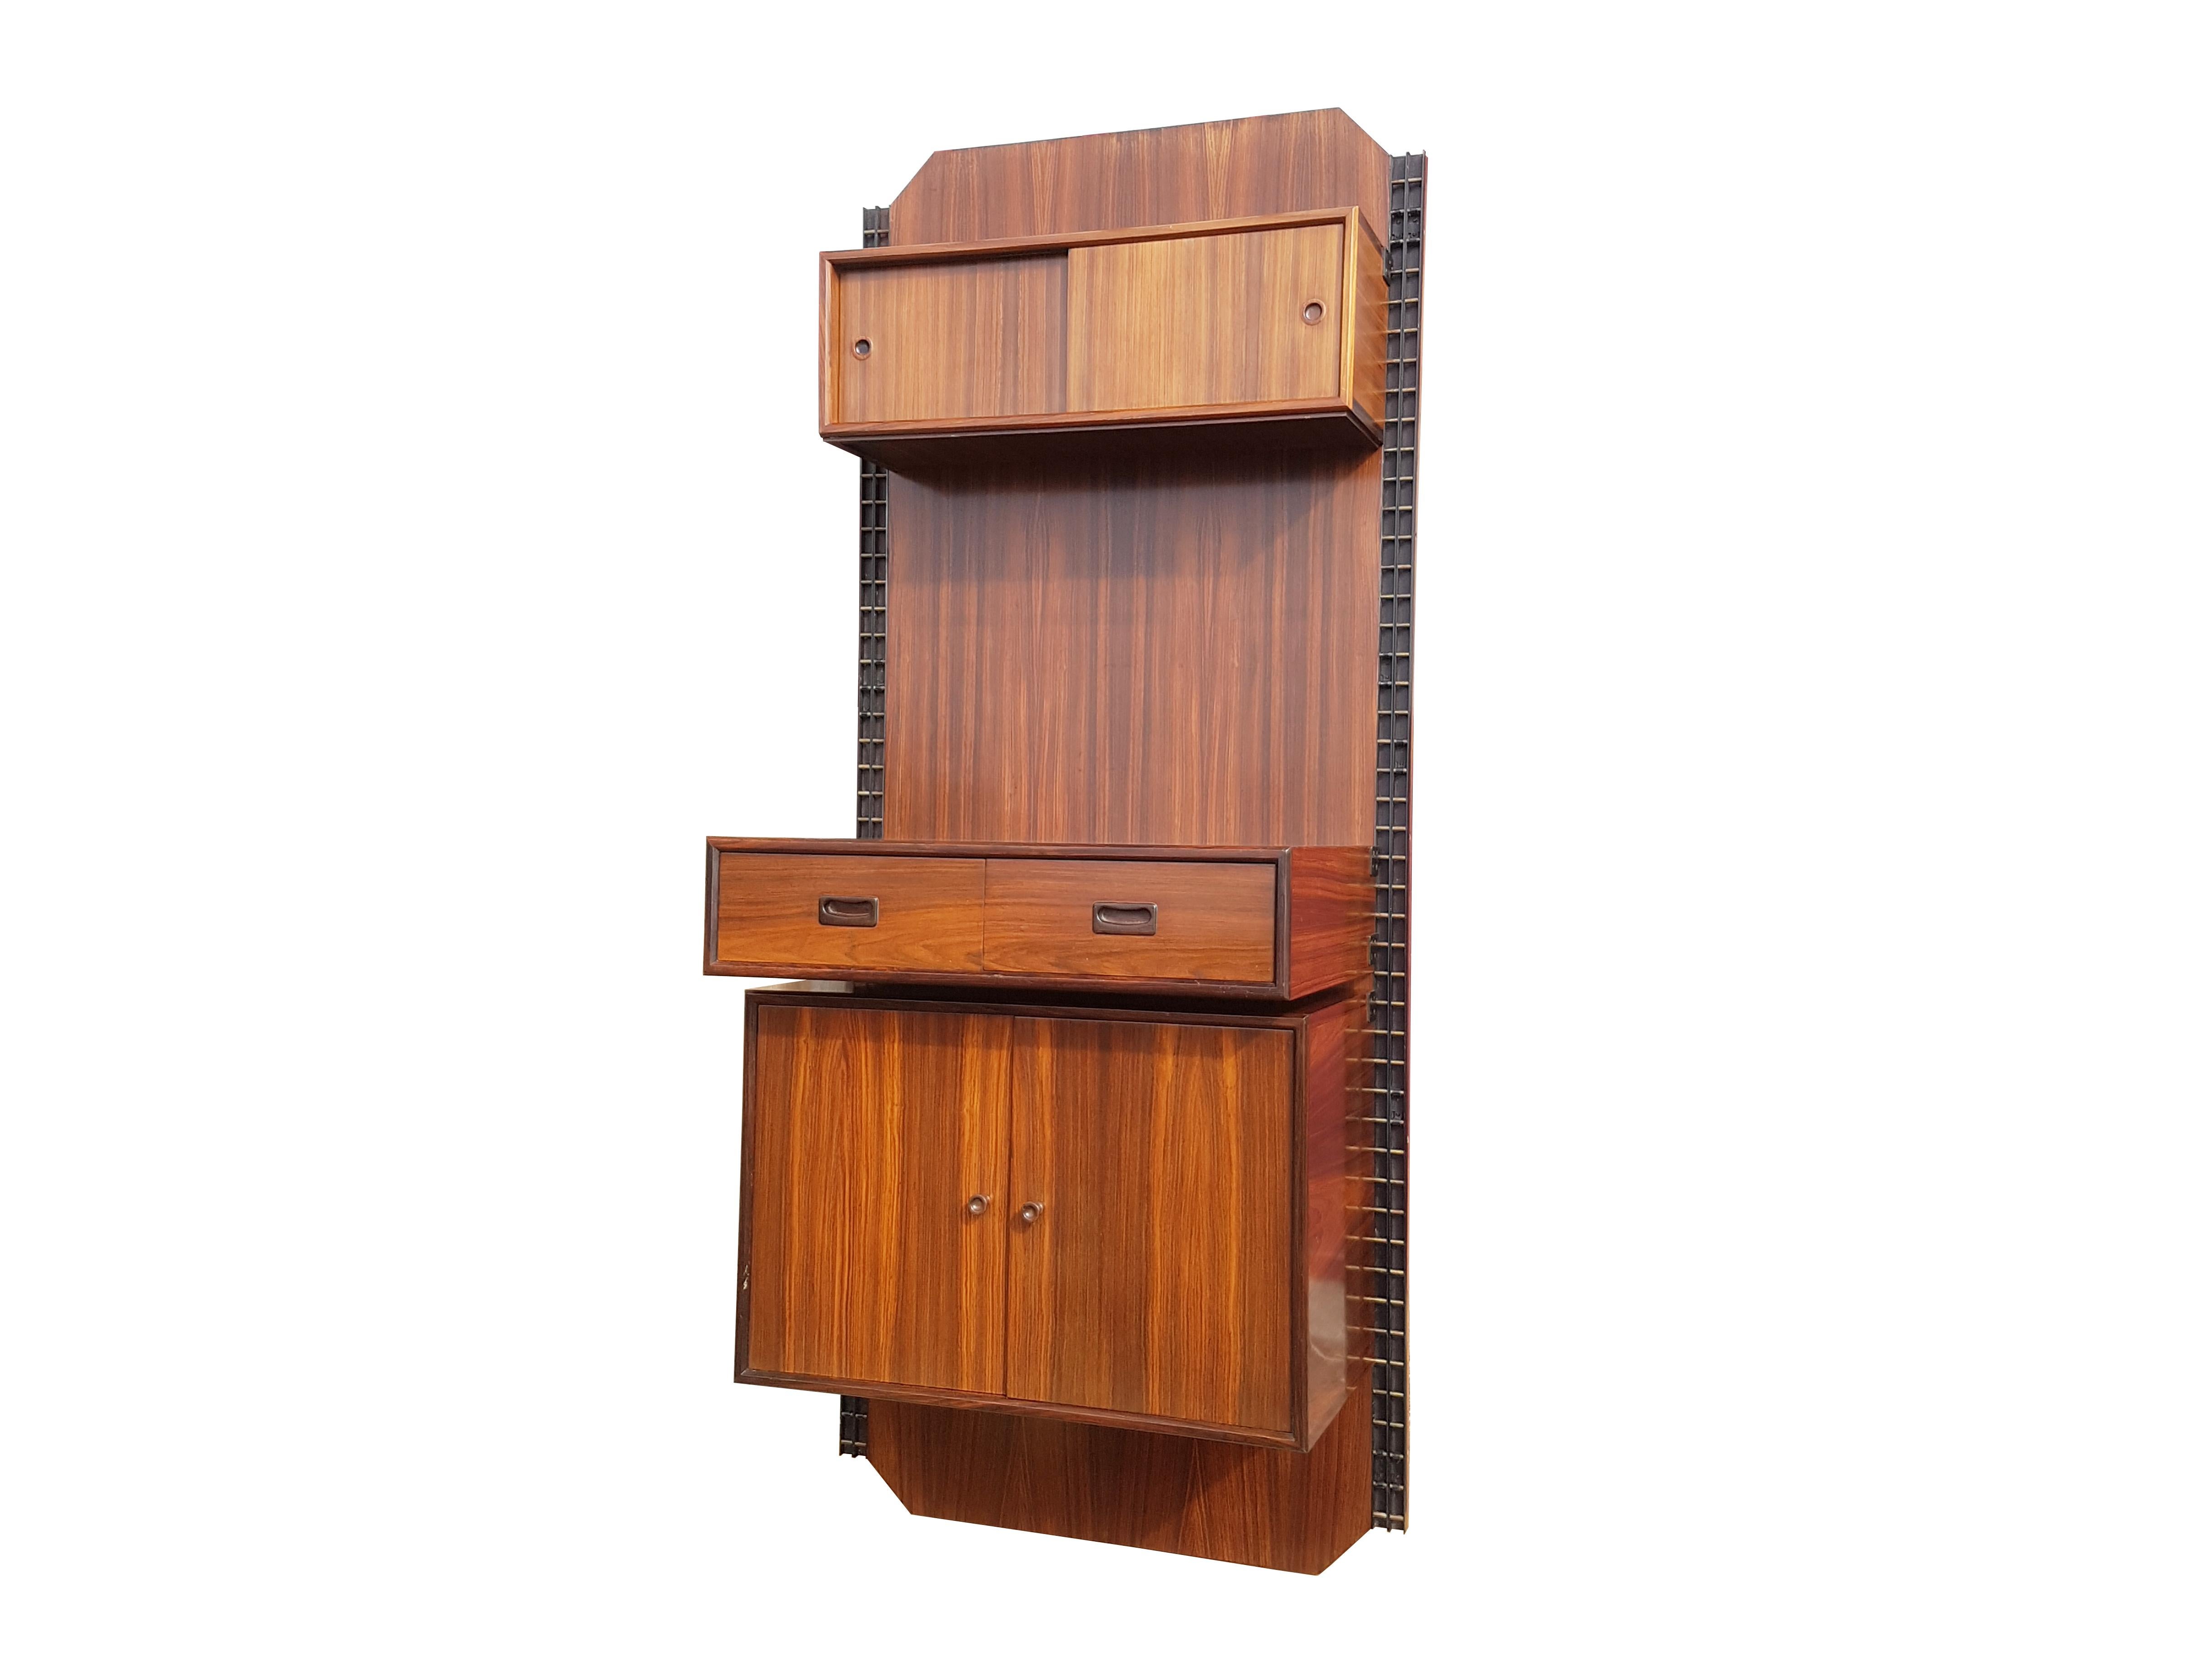 Italian Mid-Century Modern Wood, Brass & Painted Metal Wall Unit Bookshelf In Good Condition For Sale In Varese, Lombardia